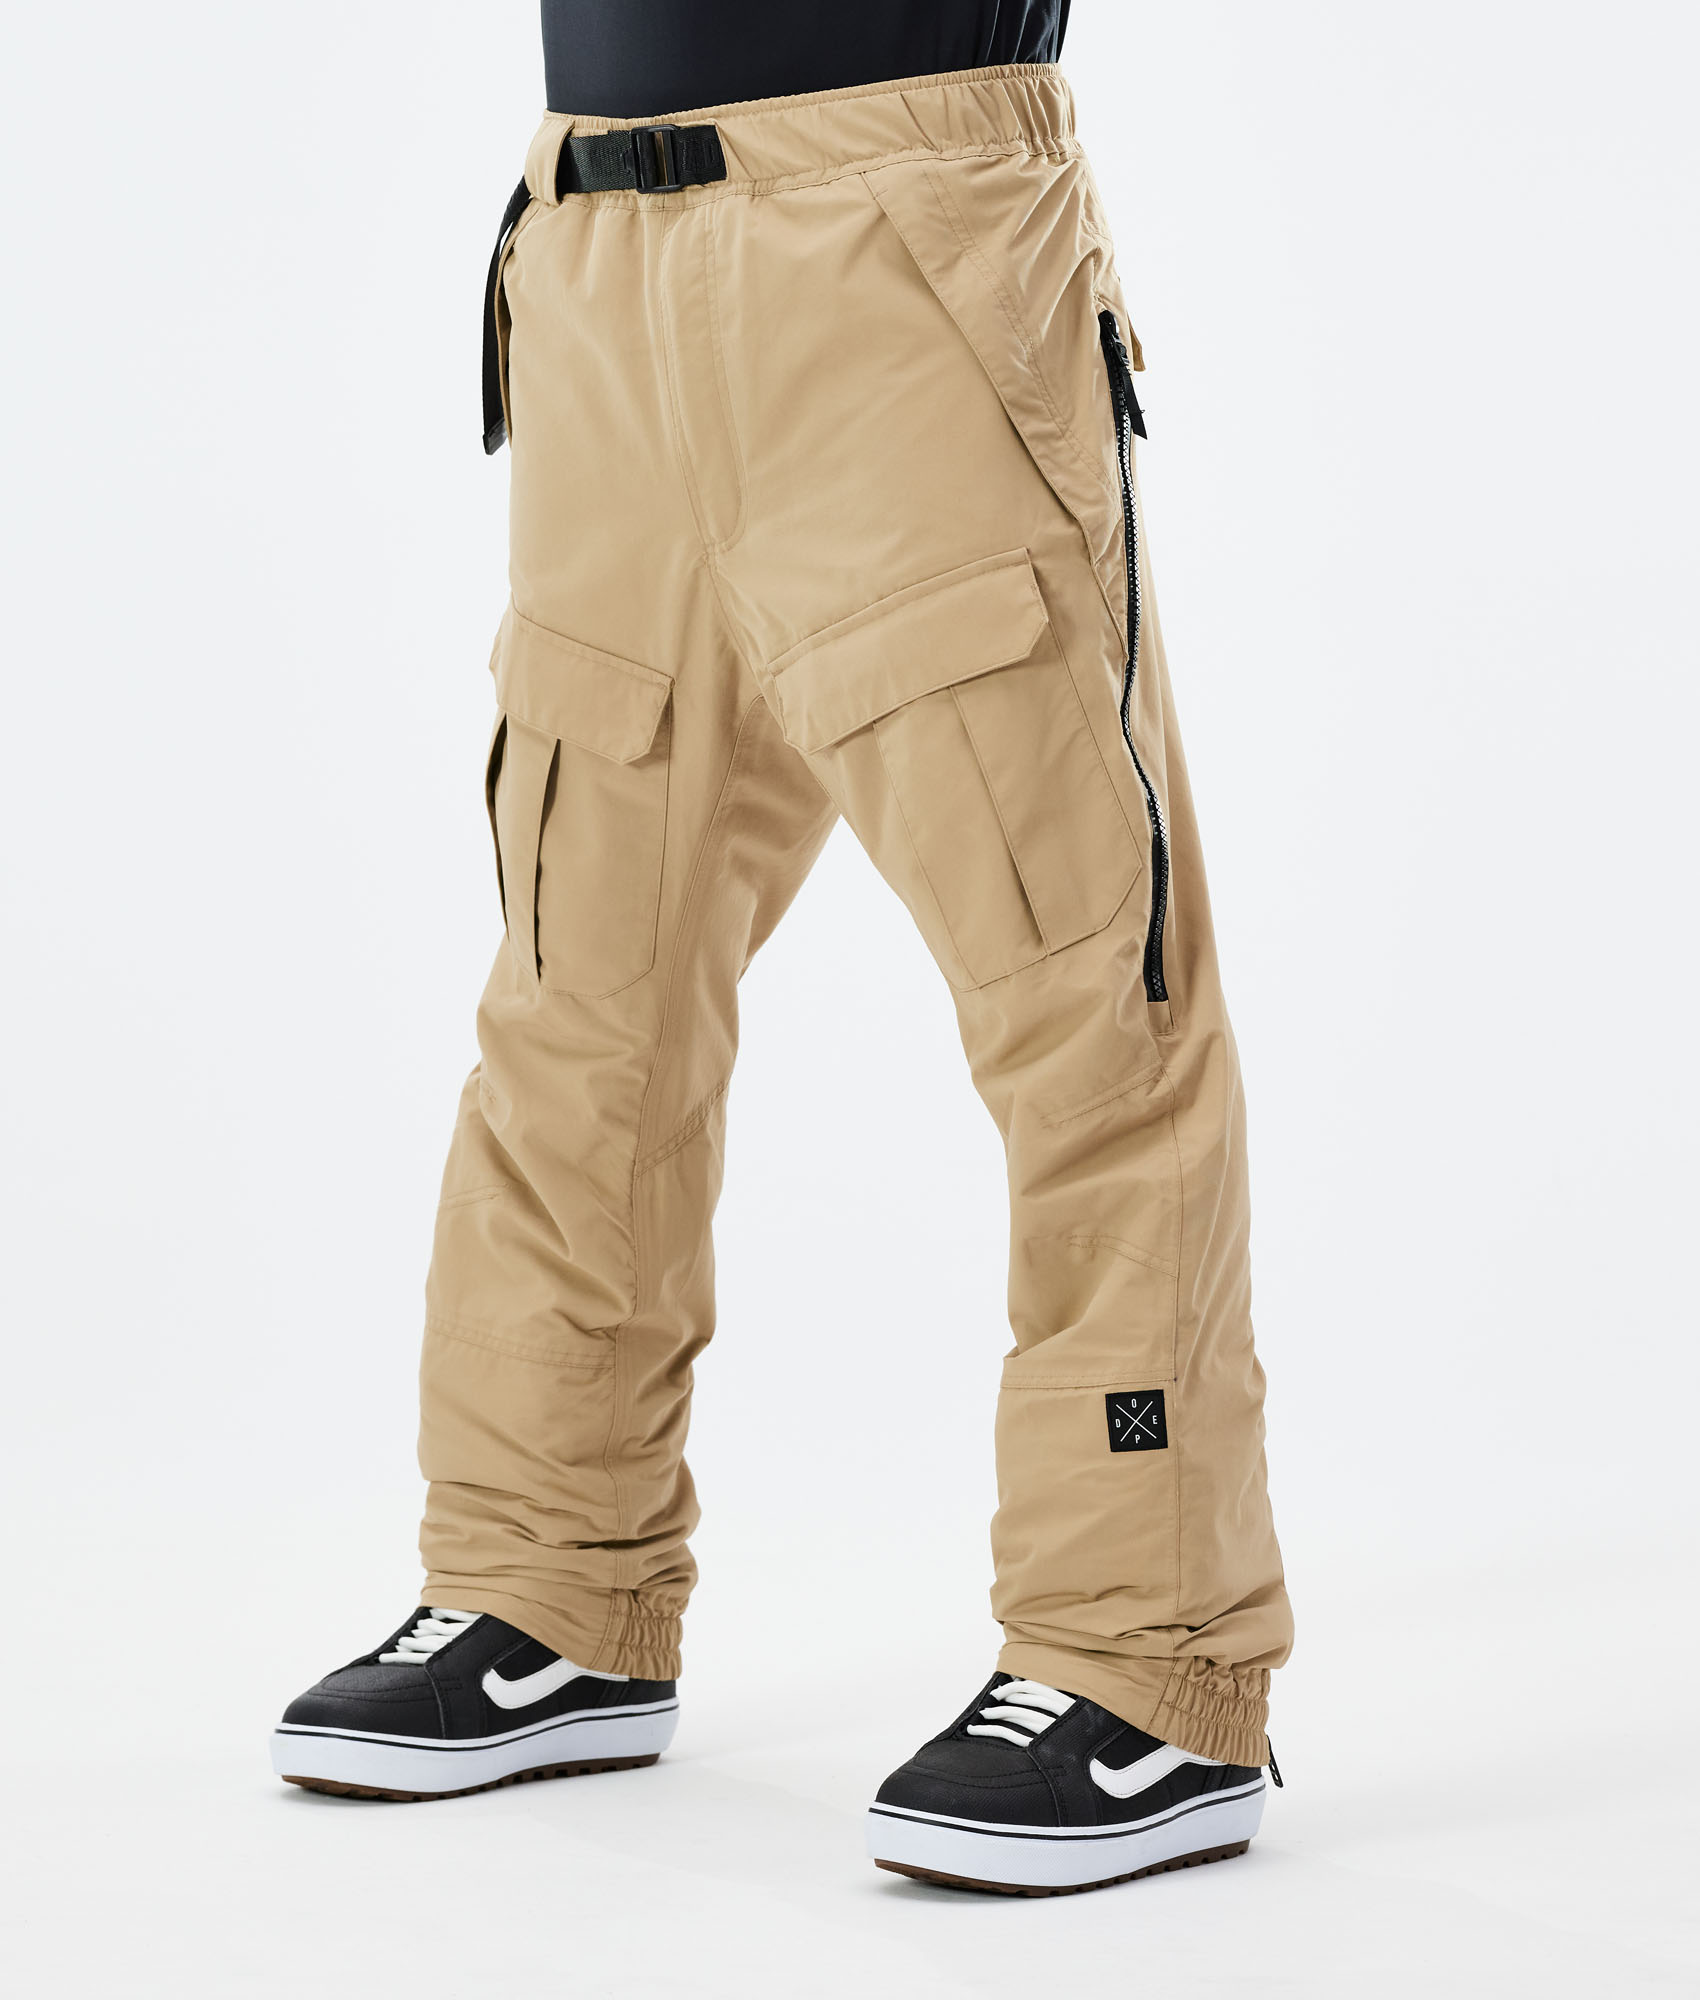 Quiksilver Travis Rice Stretch Snow Pants - The whole Europe's Skate- and  Surfshop